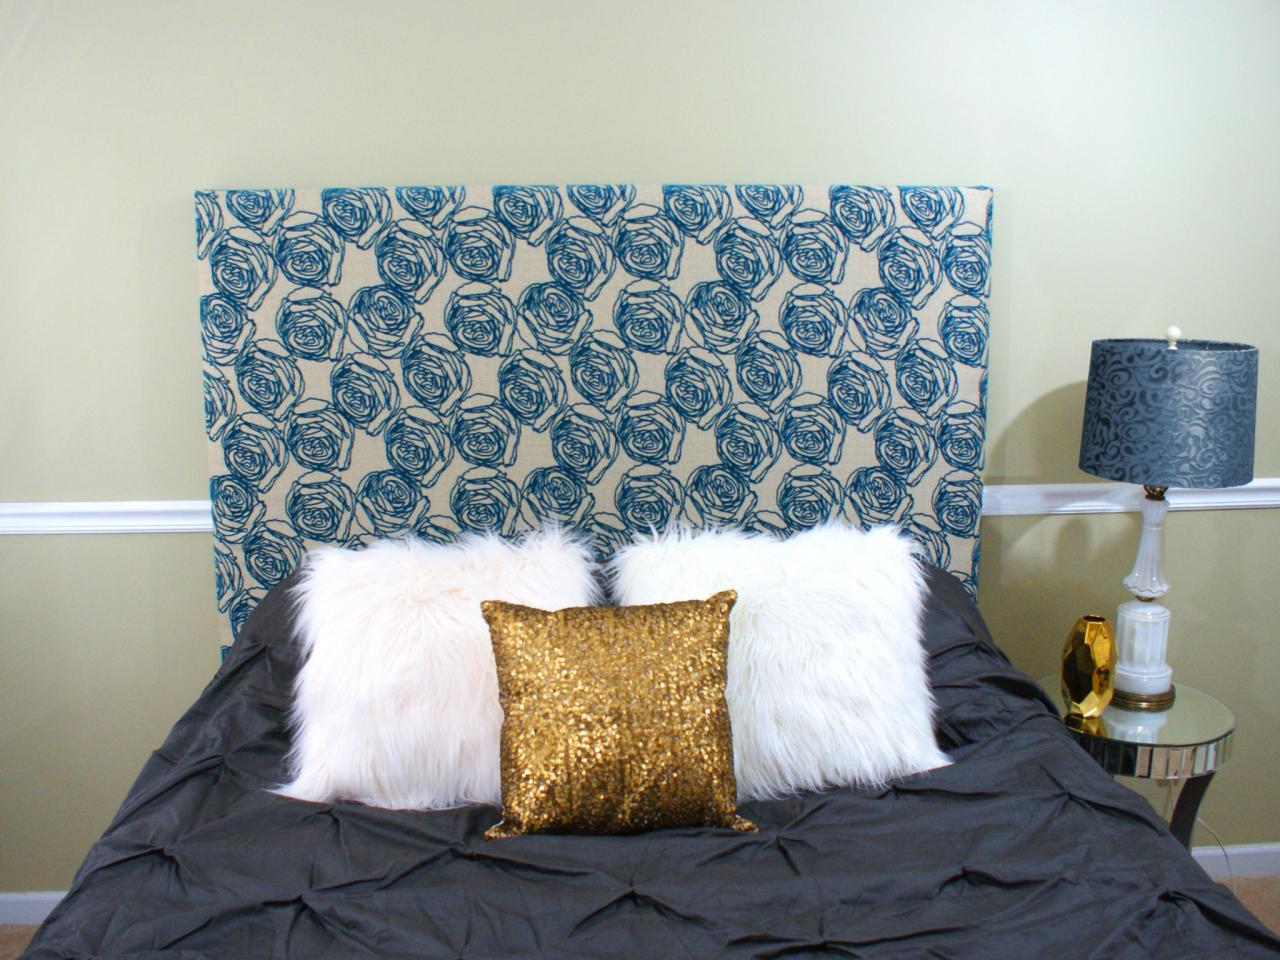 How To Upholster A Headboard For, How To Make Your Own Headboard For A King Size Bed